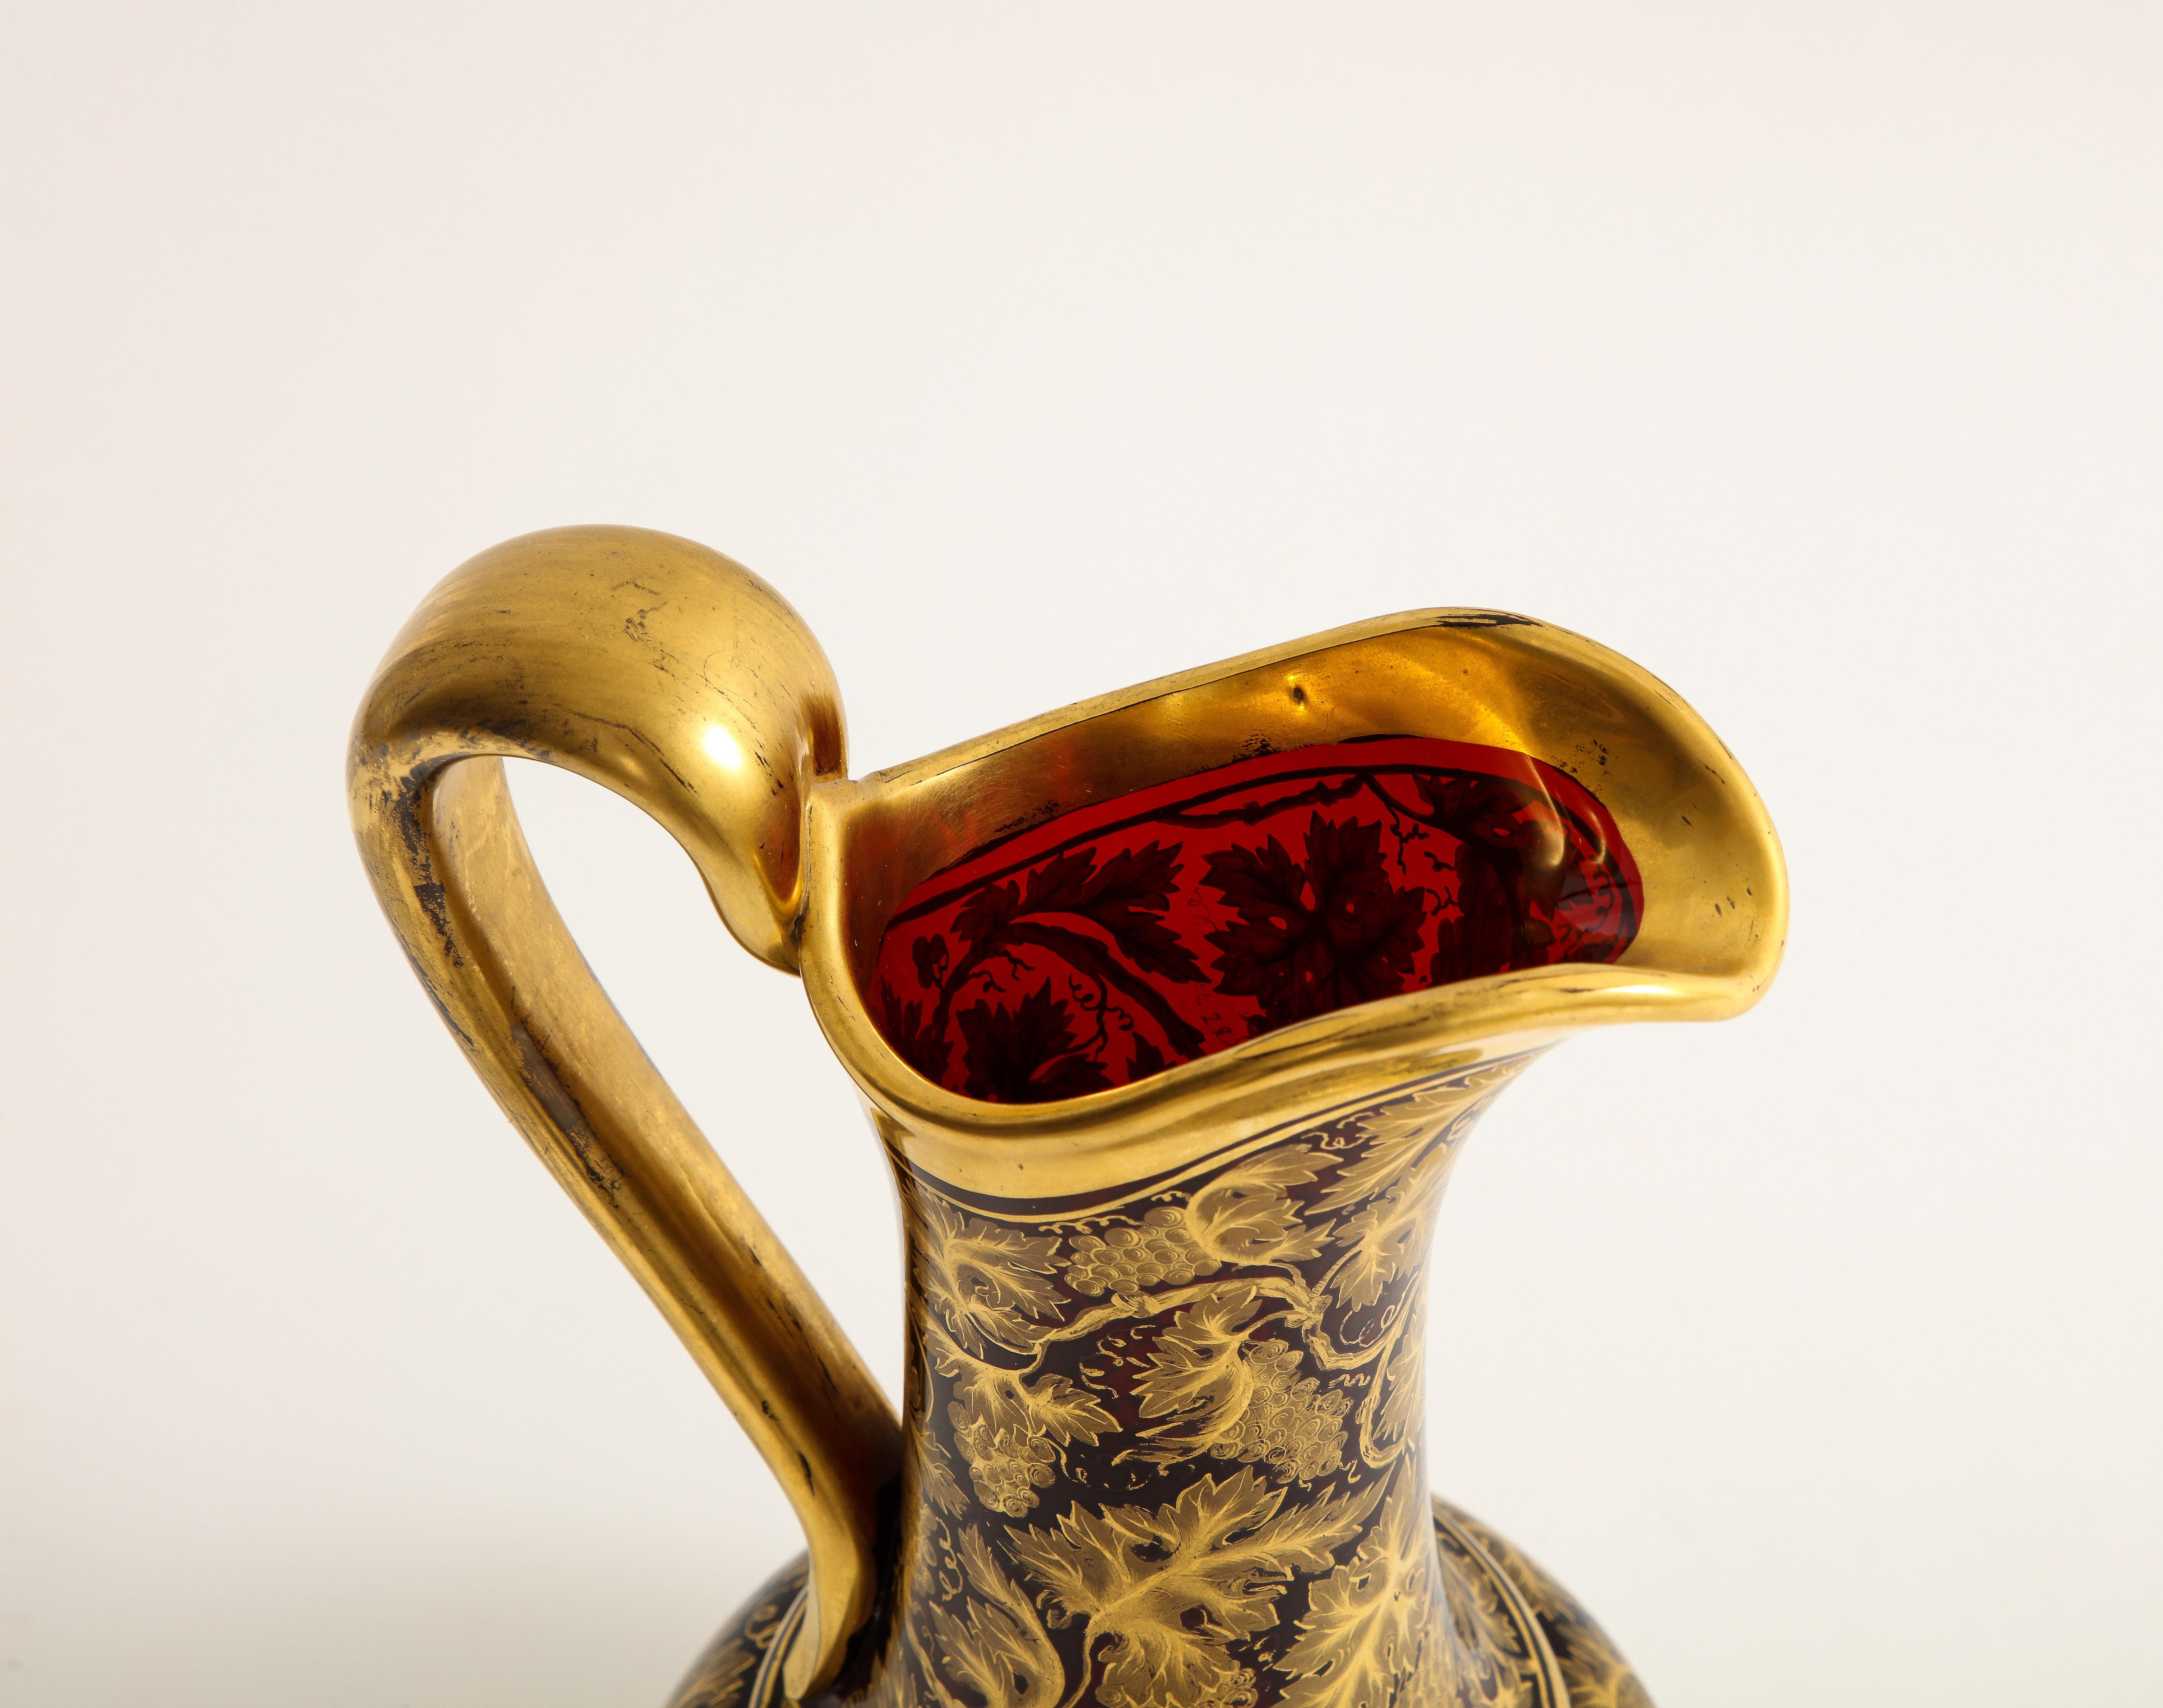 Marvelous 19th Century Bohemian Red Crystal & 24k Gold Decorated Ewer For Sale 3